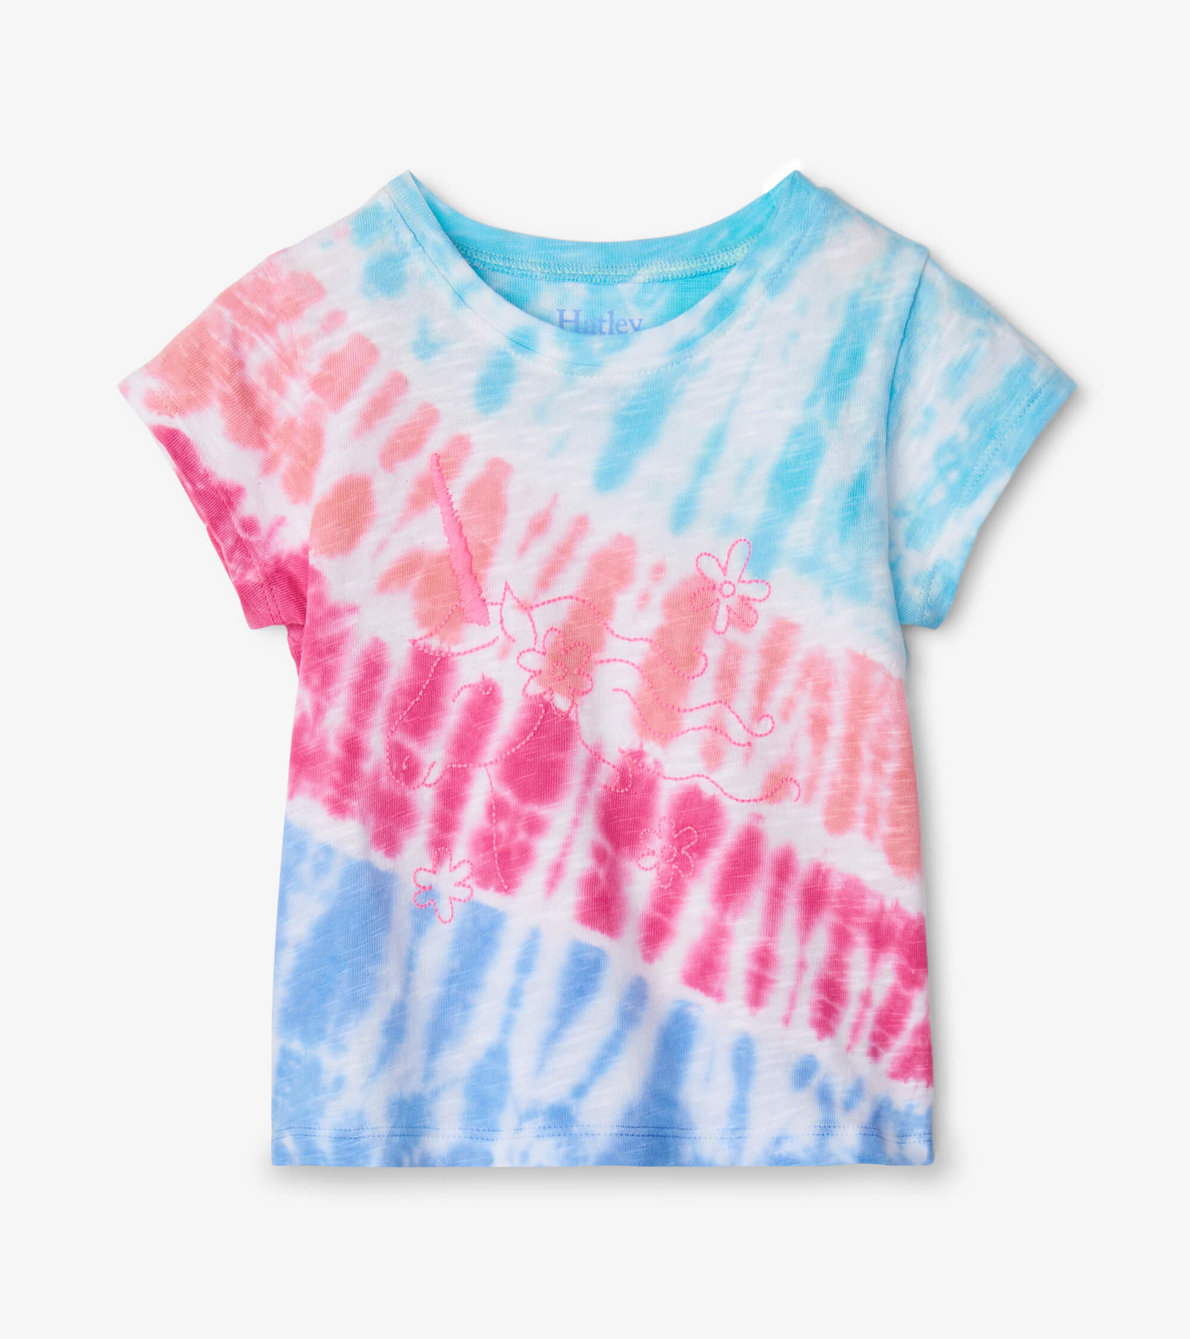 View larger image of Summer Tie Dye Toddler Graphic Tee